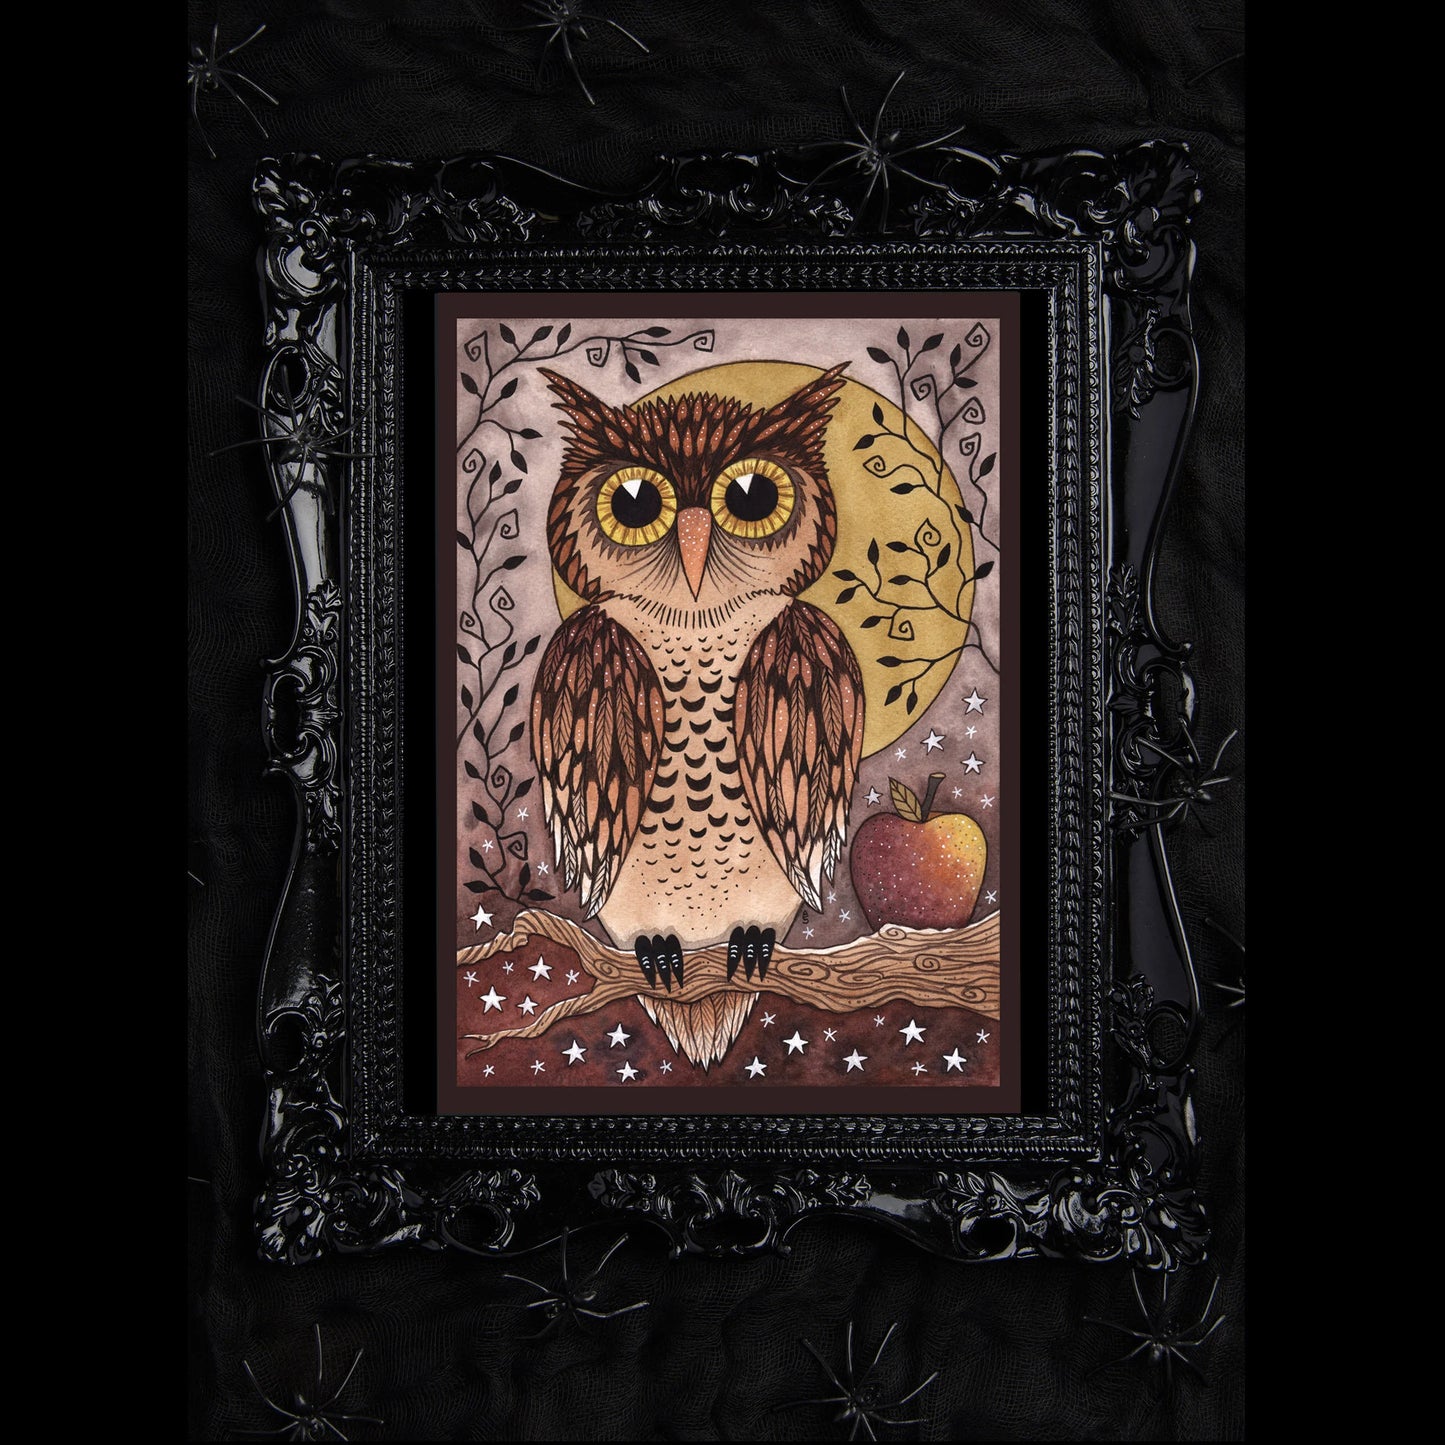 Wise Old Owl Print - A5 - A4 - A3 Vintage Style Halloween Watercolour Owl Illustration - Brown Purple Yellow Spooky Owl Moon And Apple Art